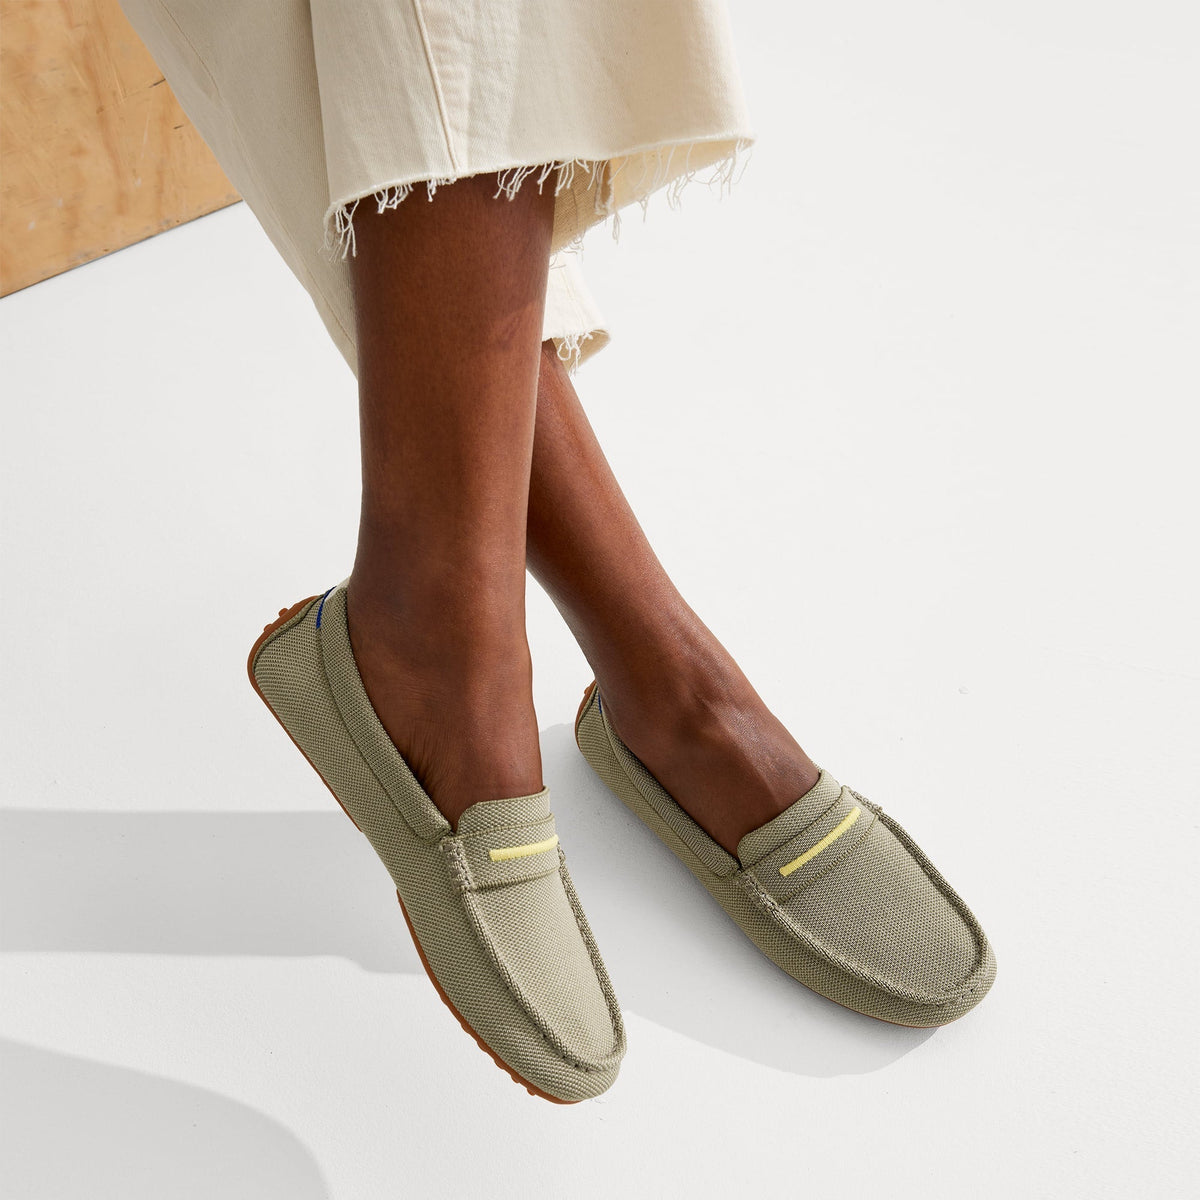 Shoppers Call These Lace-Up Loafers Their 'New Summer Shoes